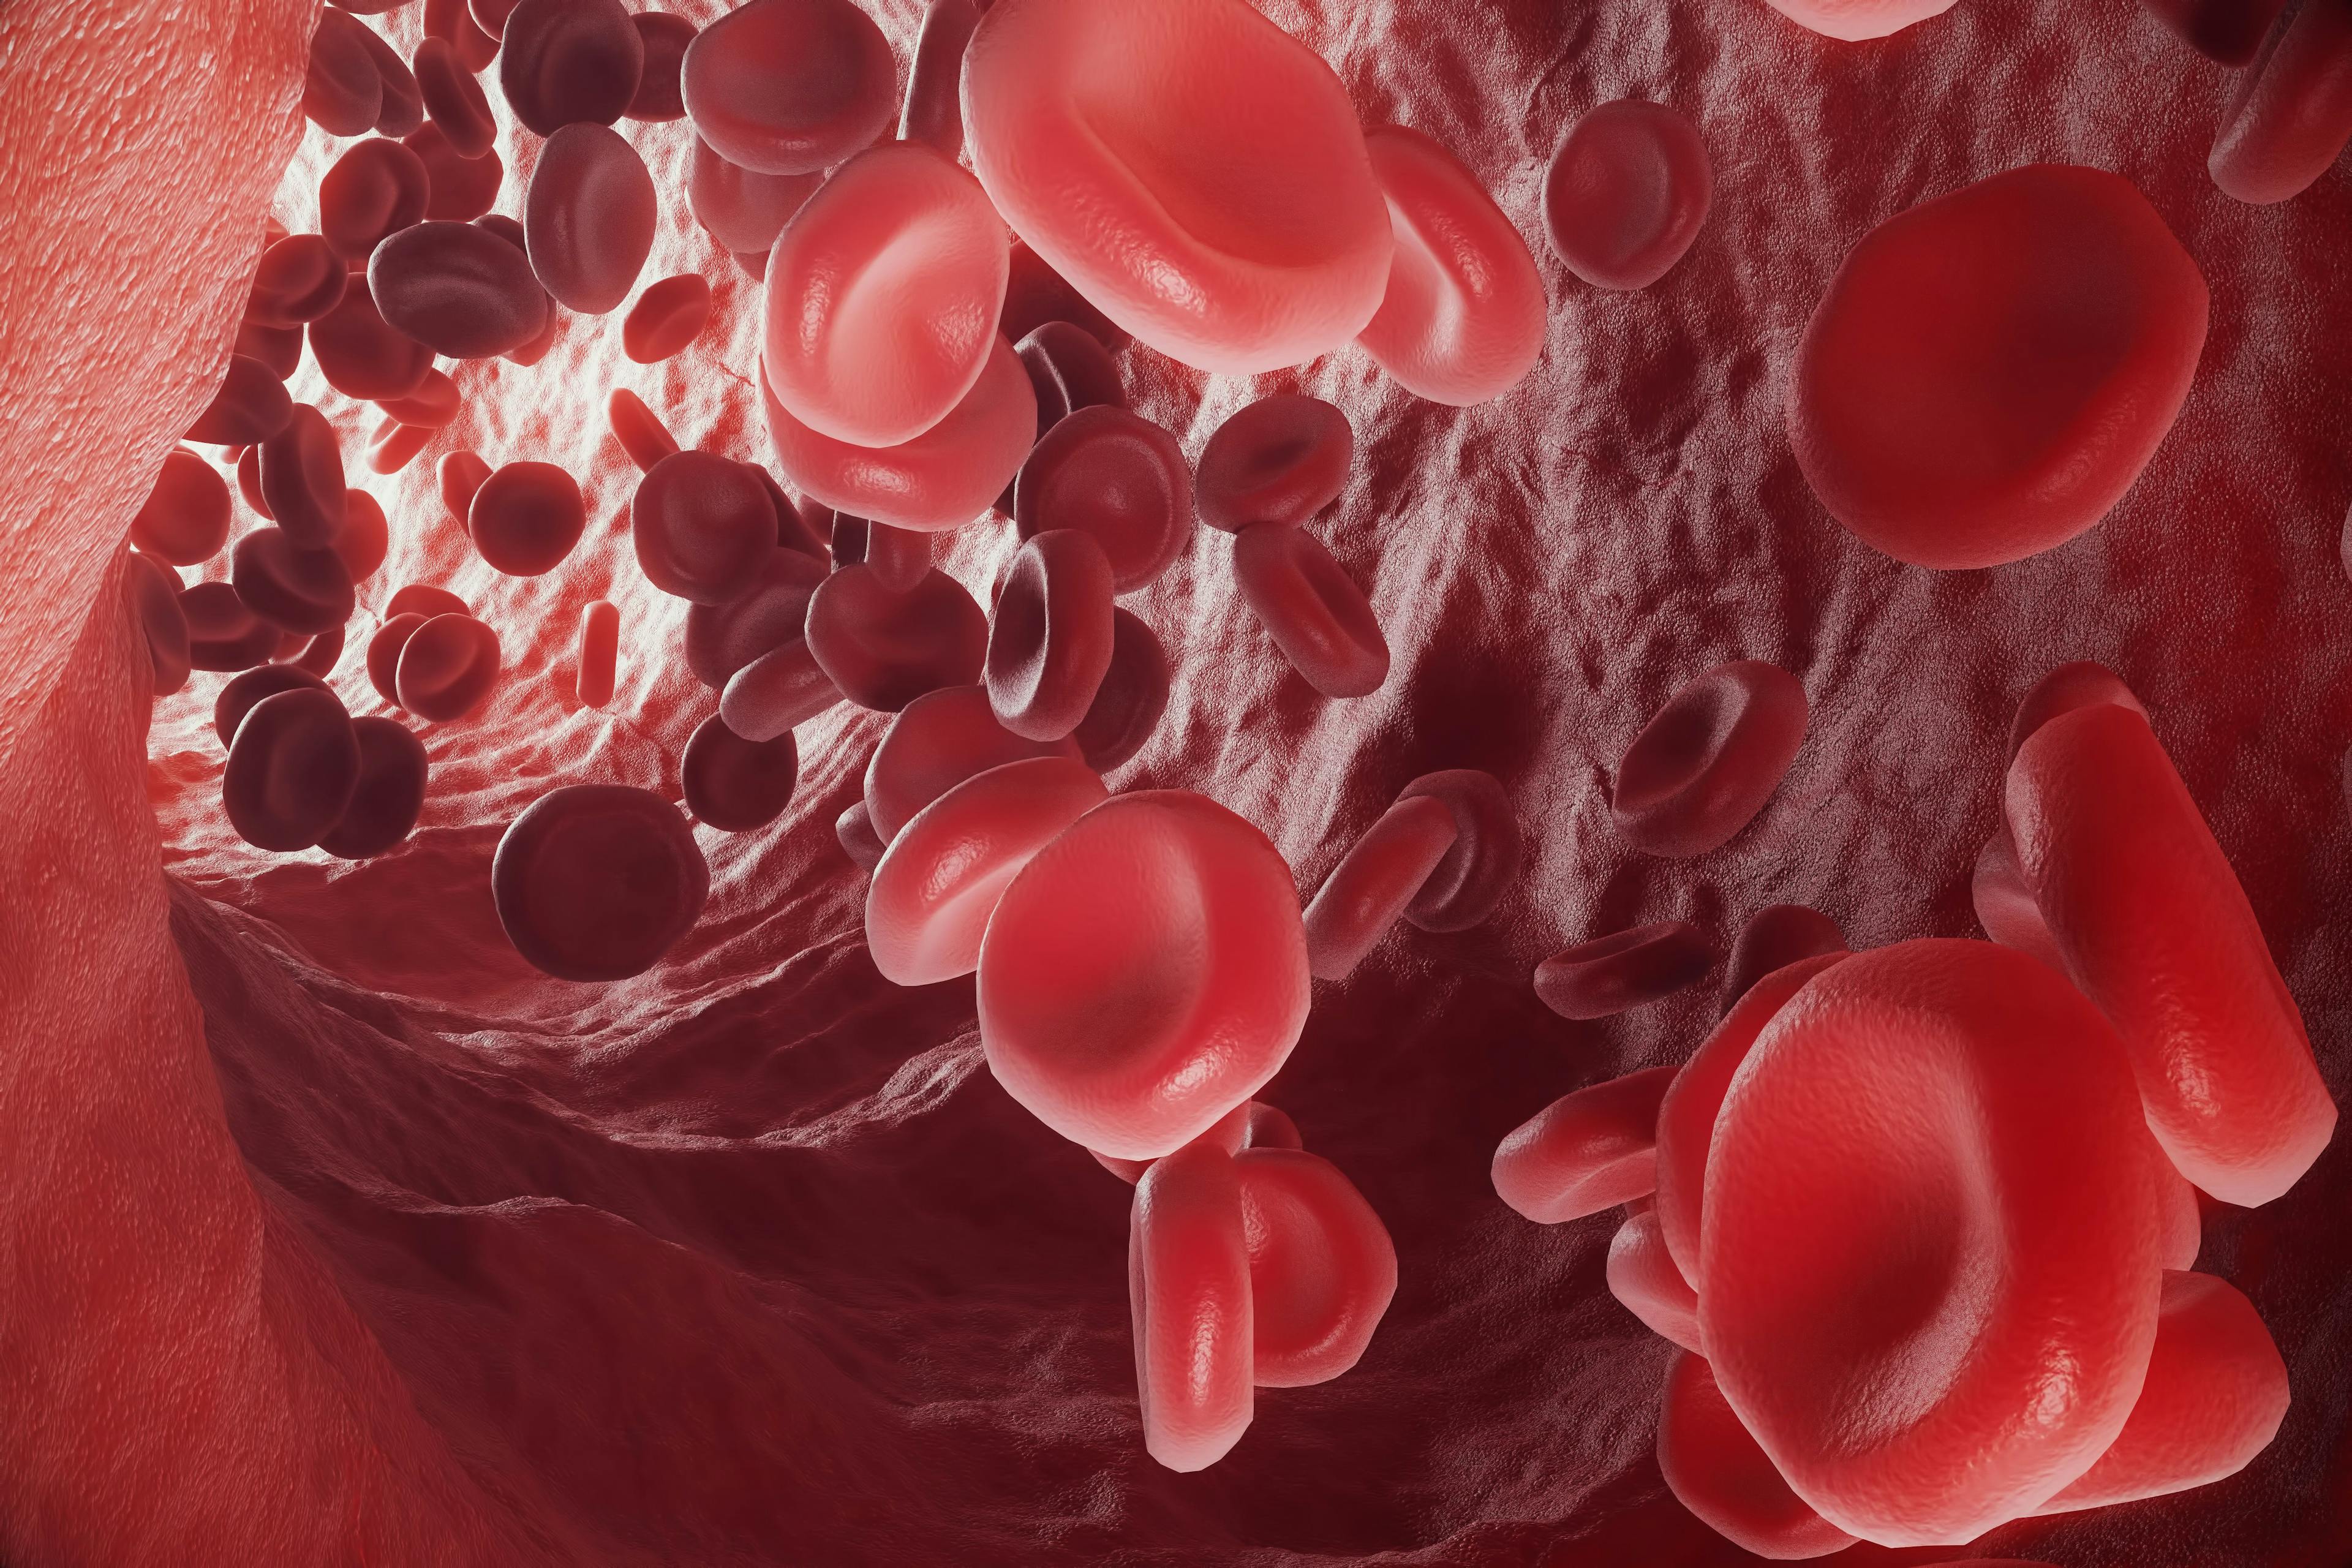 Orca-T improved efficacy outcomes over standard of care therapy for patients with serious hematologic malignancies.